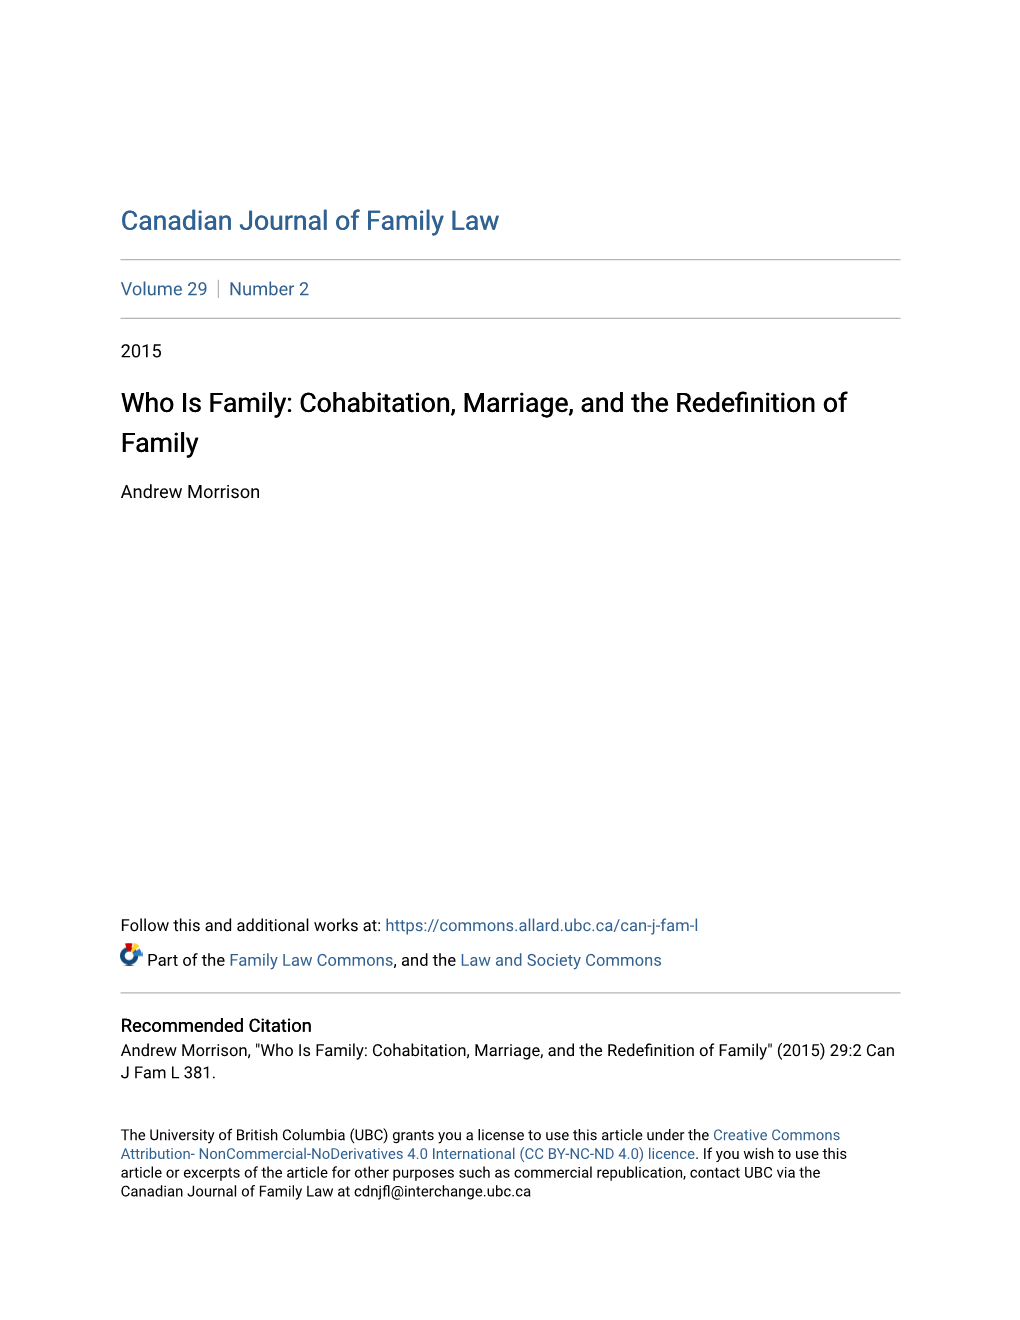 Who Is Family: Cohabitation, Marriage, and the Redefinition of Family